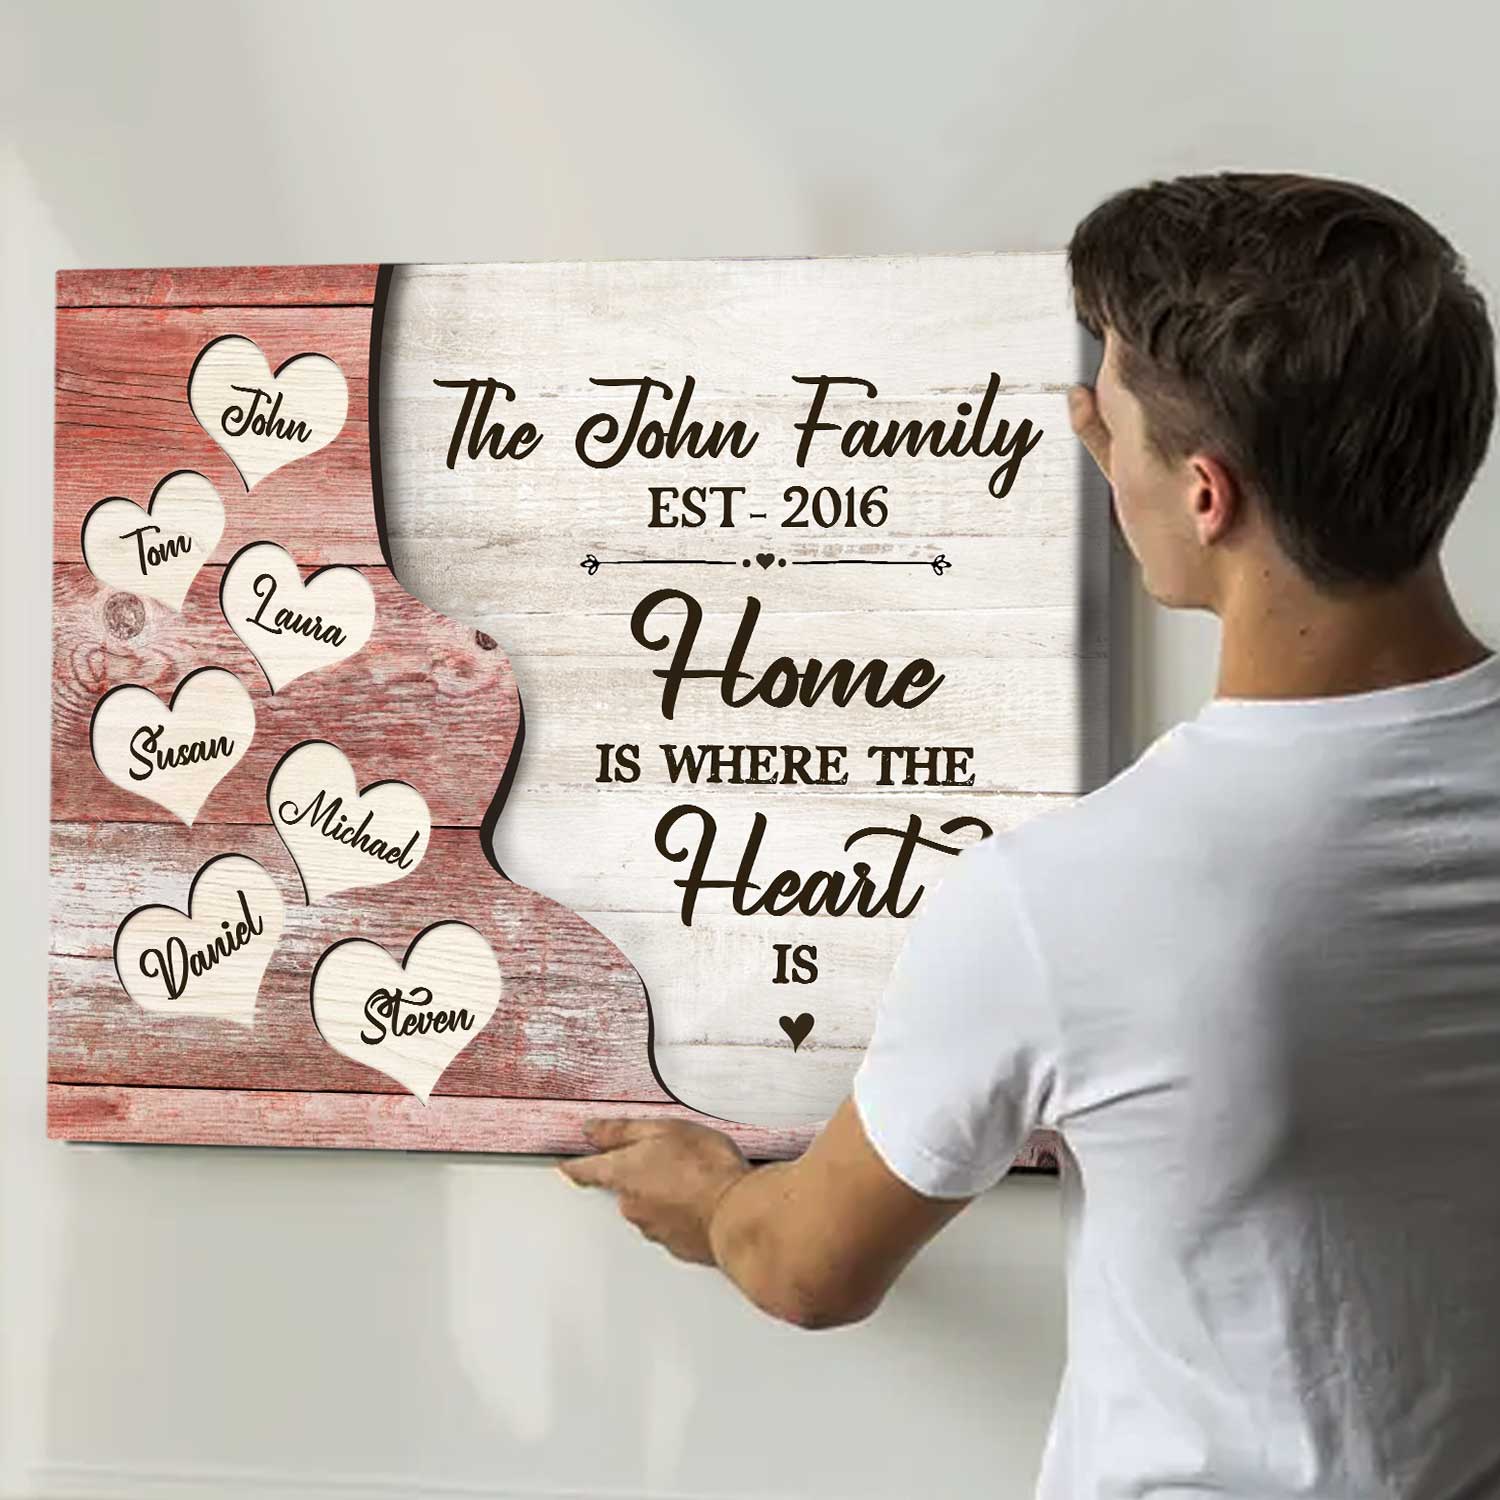 https://benicee.com/wp-content/uploads/2022/10/2022-Personalized-Christmas-Gift-for-Family-Custom-Family-Wall-Art-Best-Christmas-Gift-for-Parents-Family-Gift-3.jpg